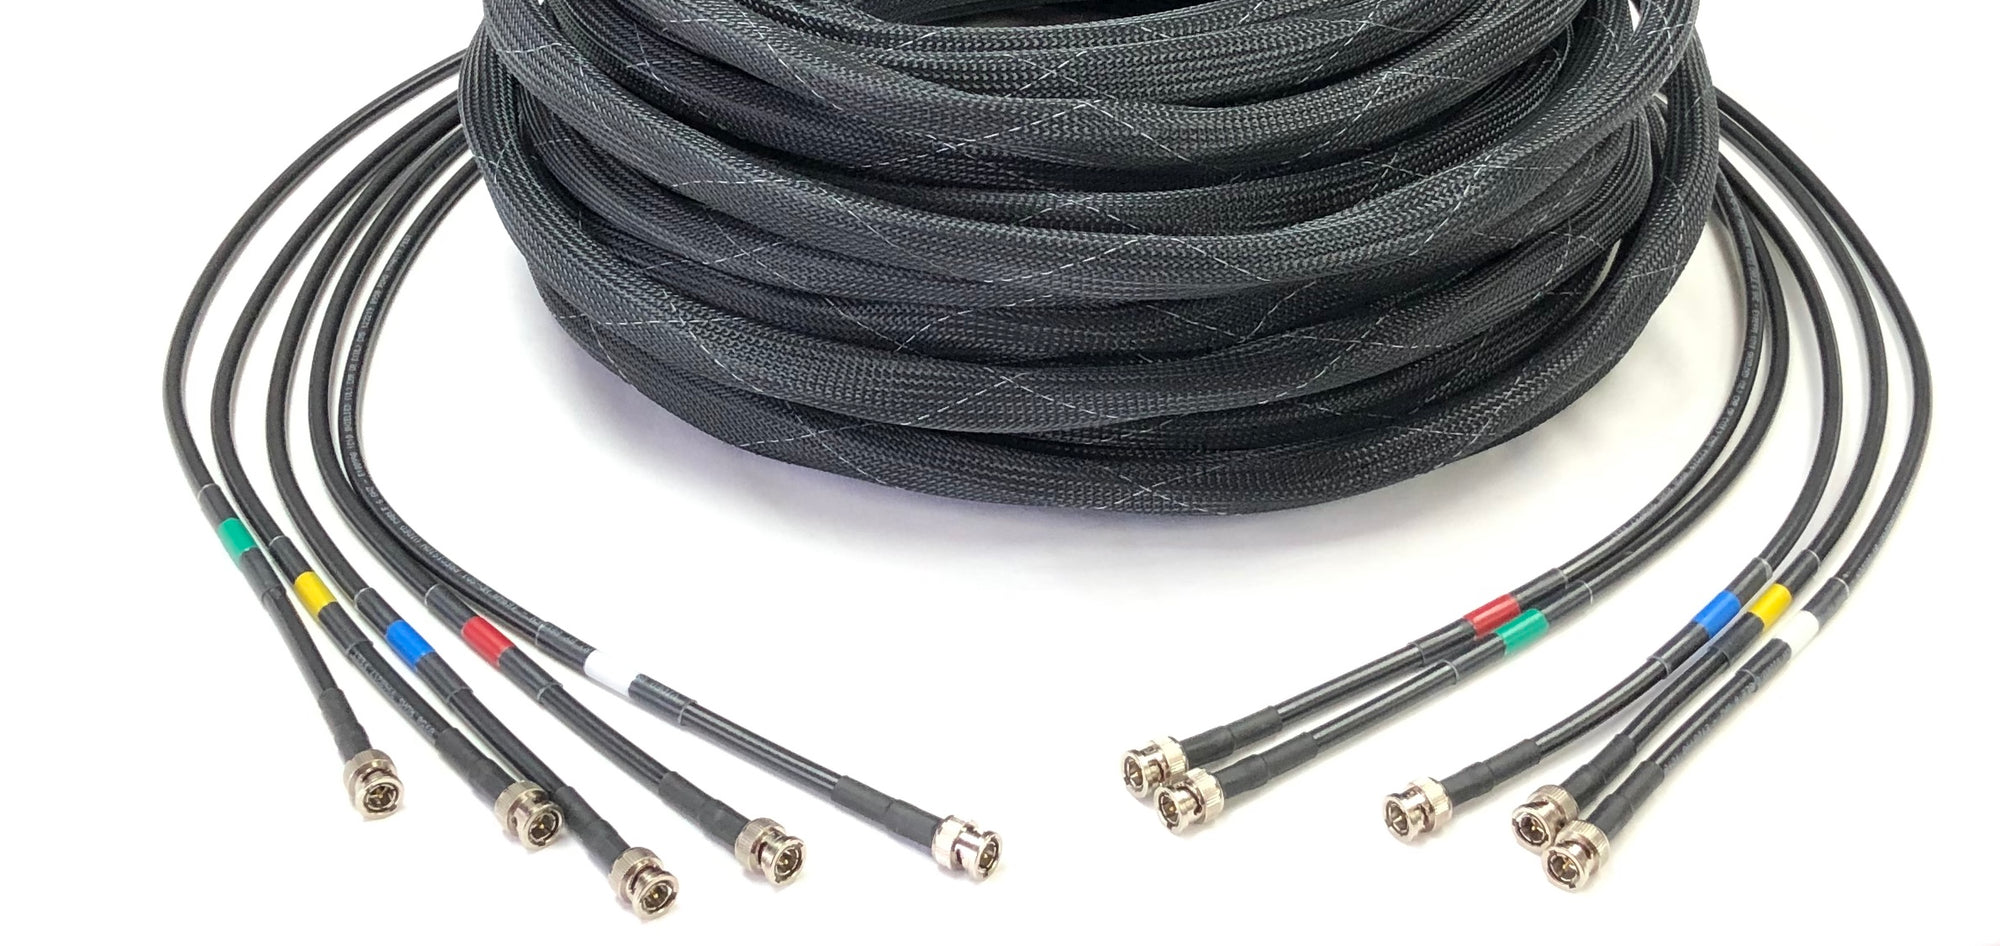 5 Channel BNC SDI - 12G Rated Belden 4694R RG6 - Flex Sleeve Snake Cables